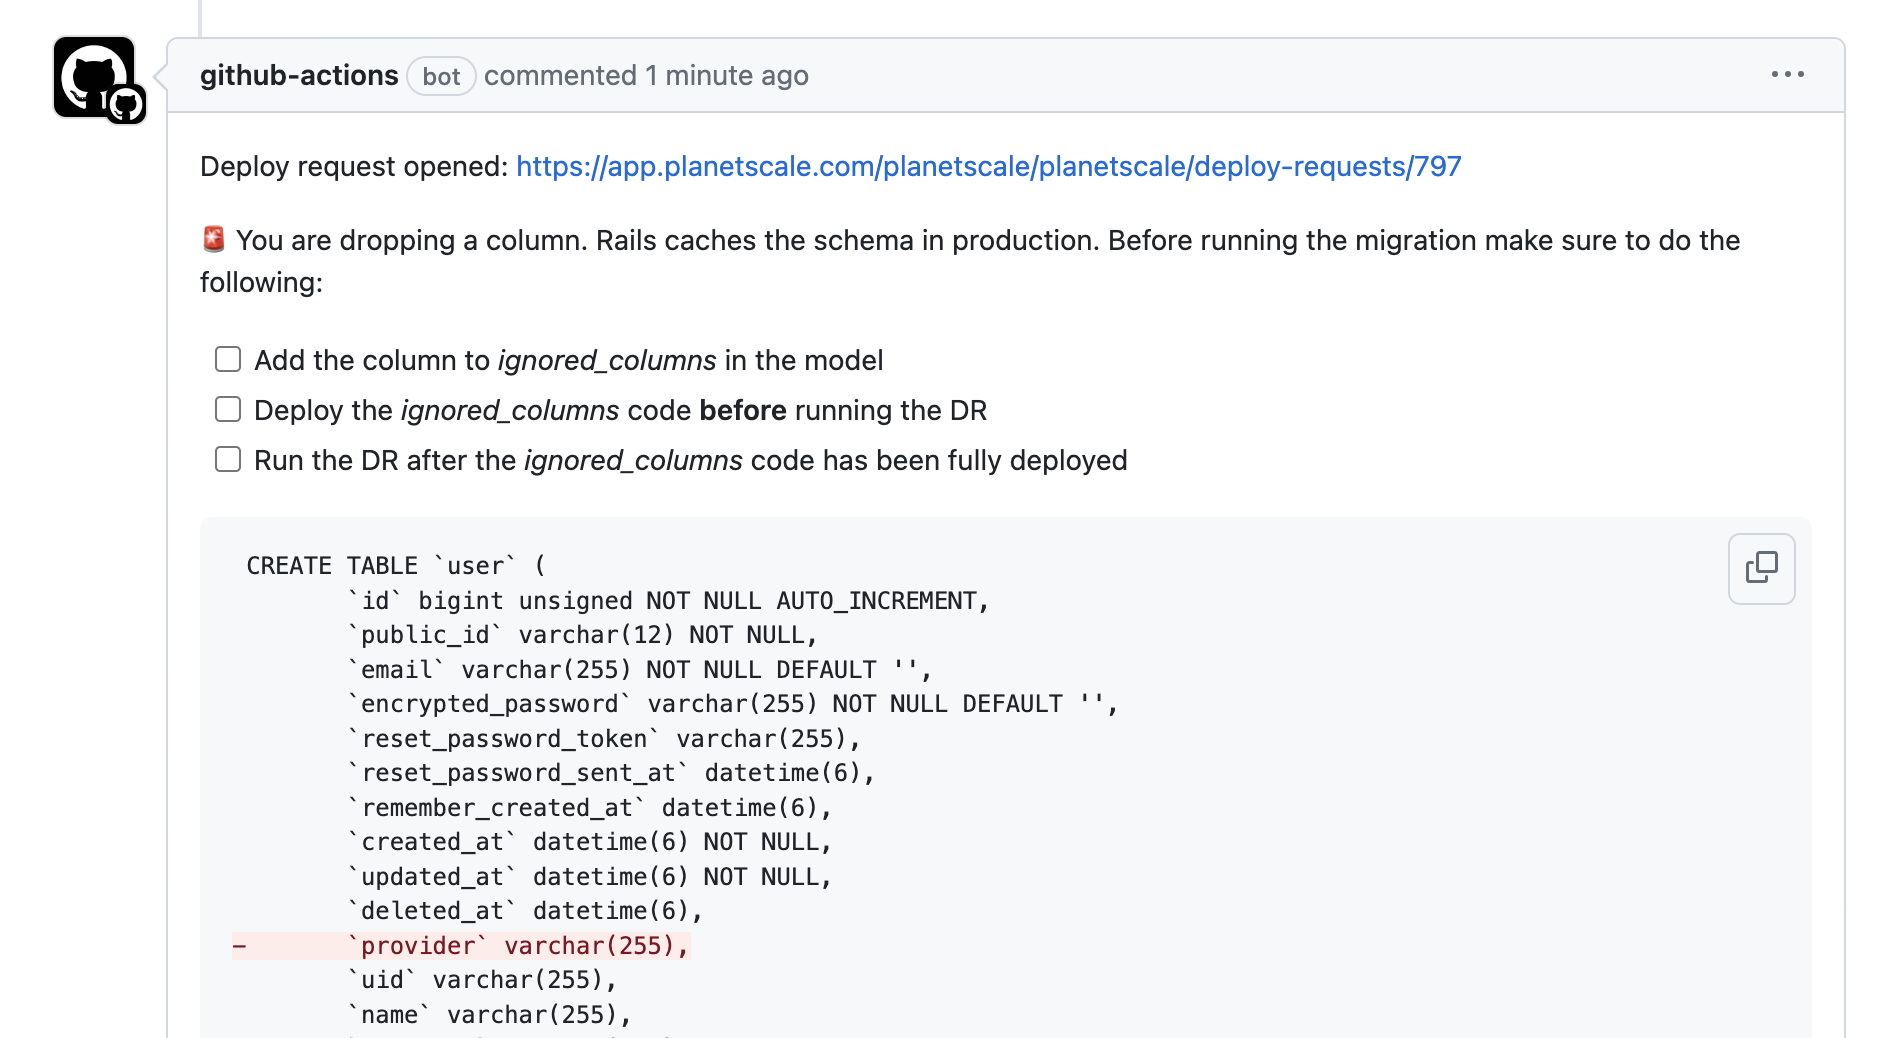 Screenshot of our GitHub bot commenting on a pull request.